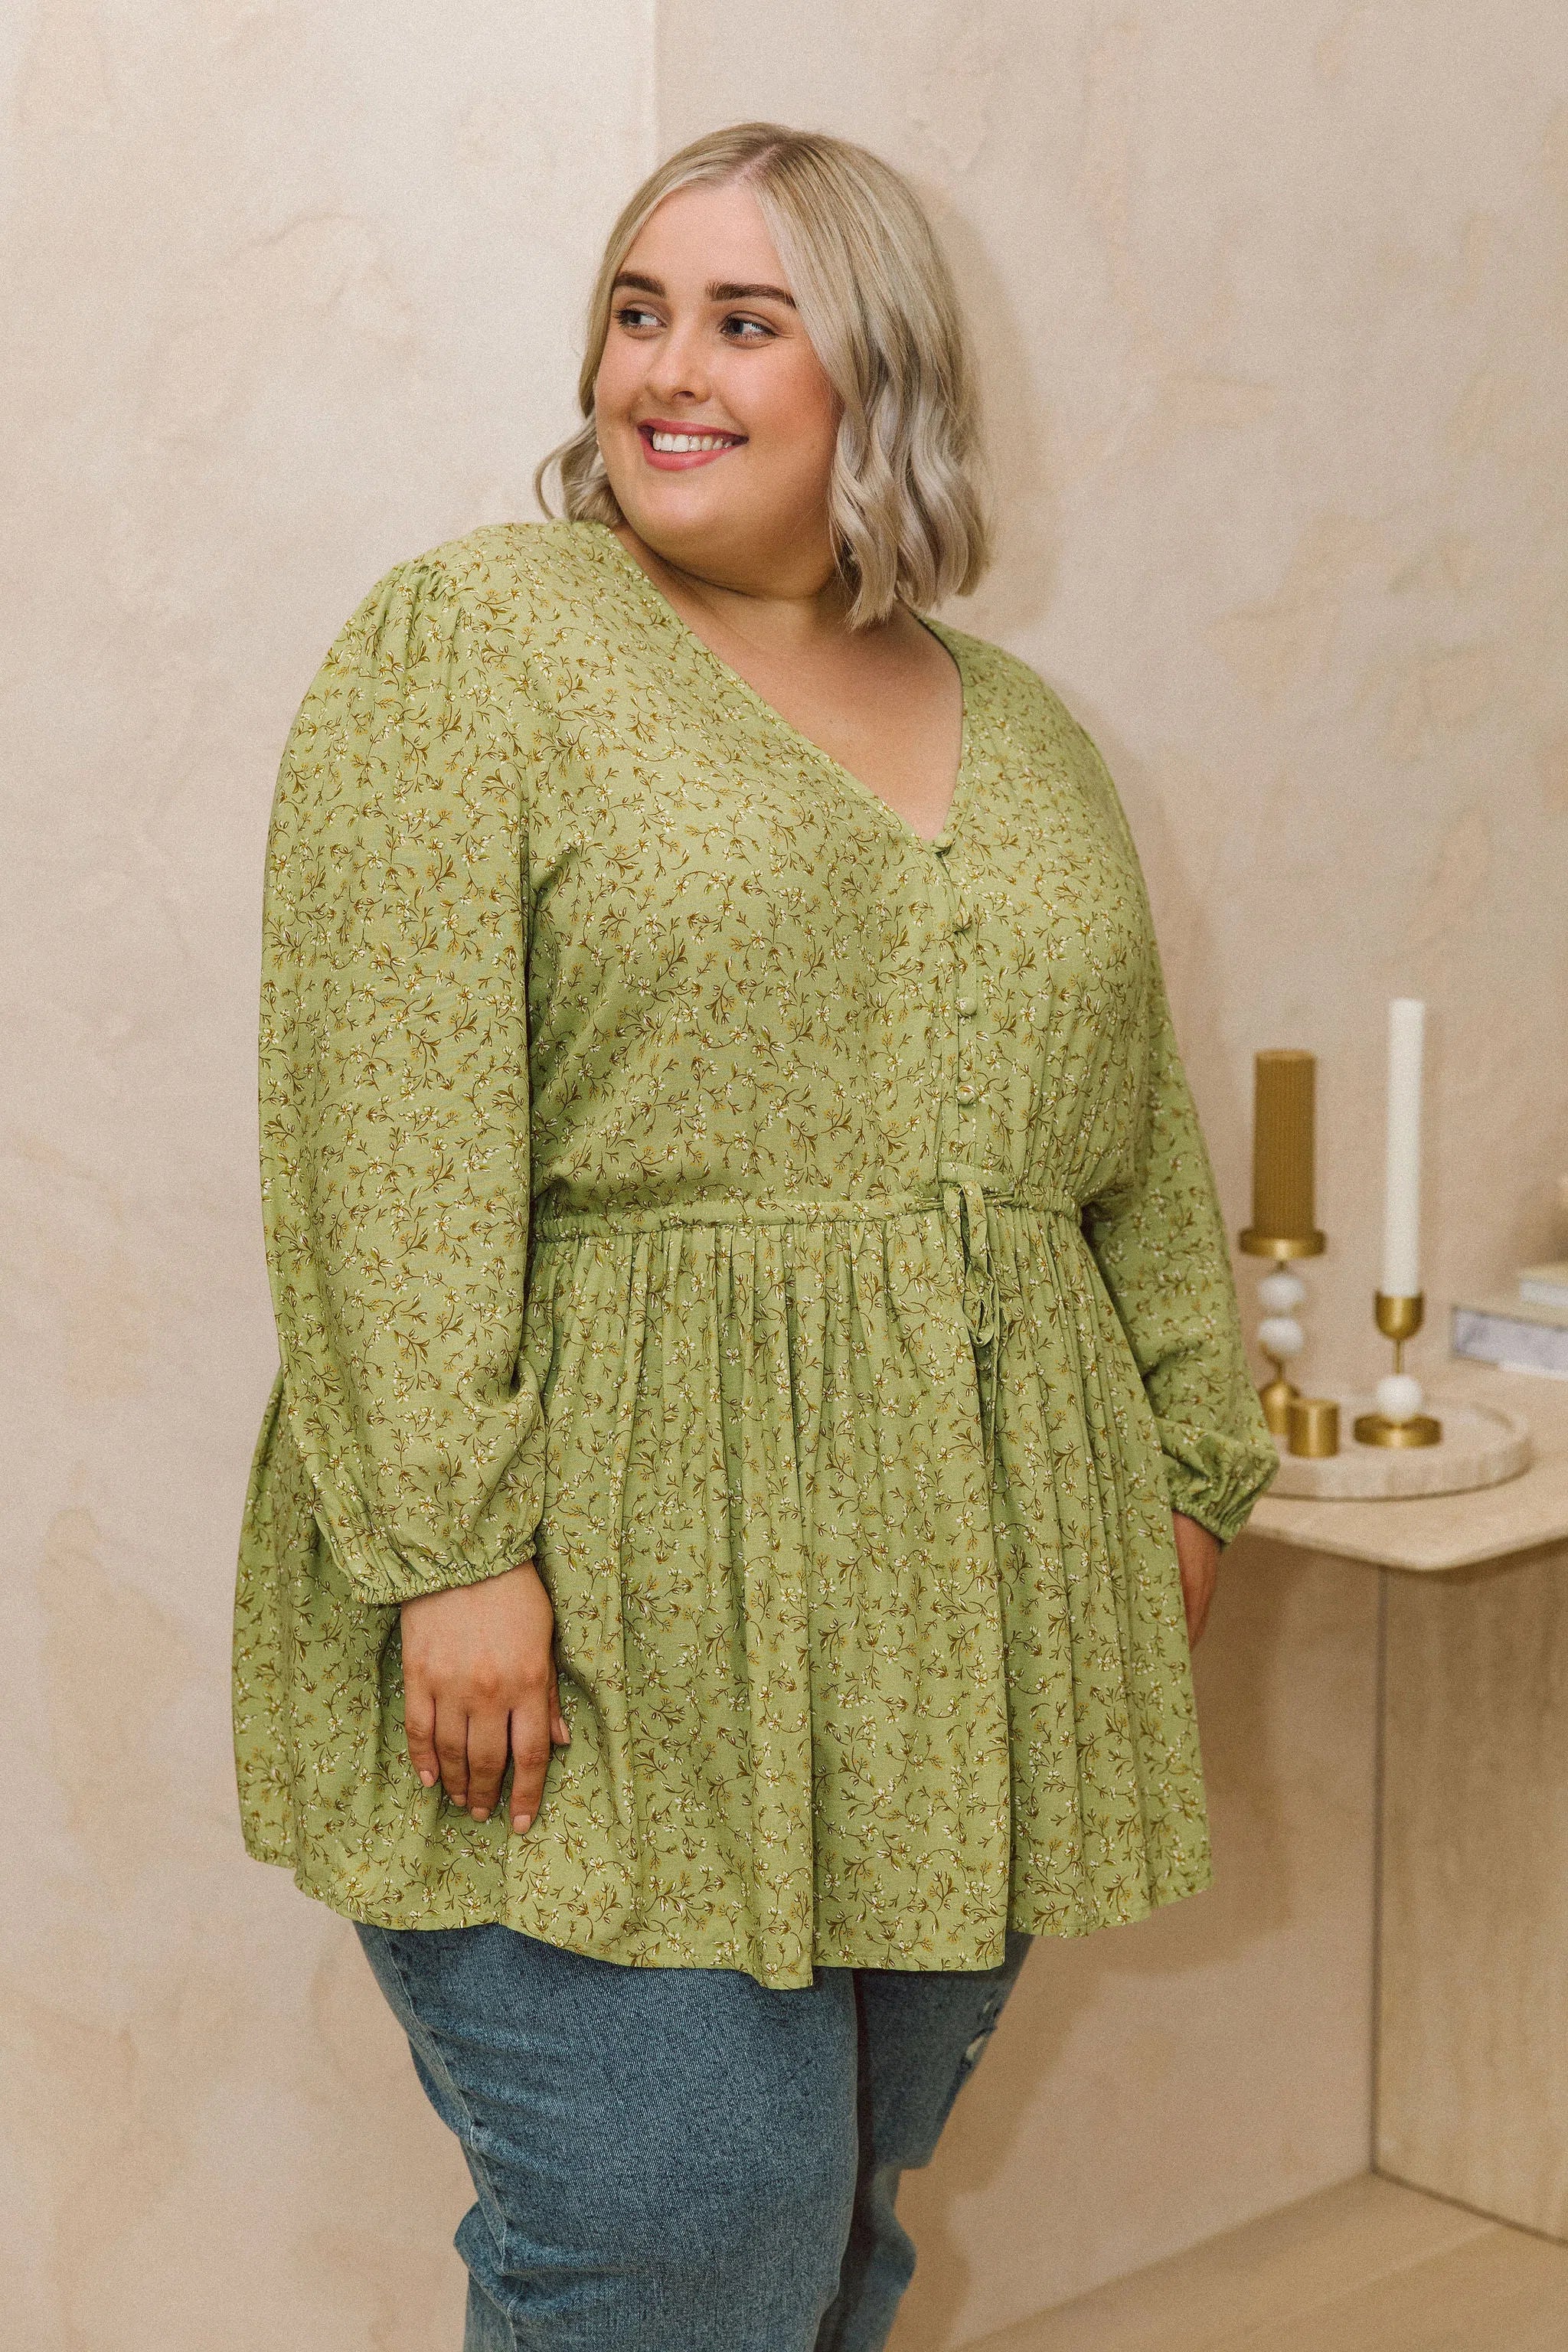 Plus Size fashion,  women modeling a Plus Size Floral Print Top - Discover Vibrant Style with Isla Top in Wildflower